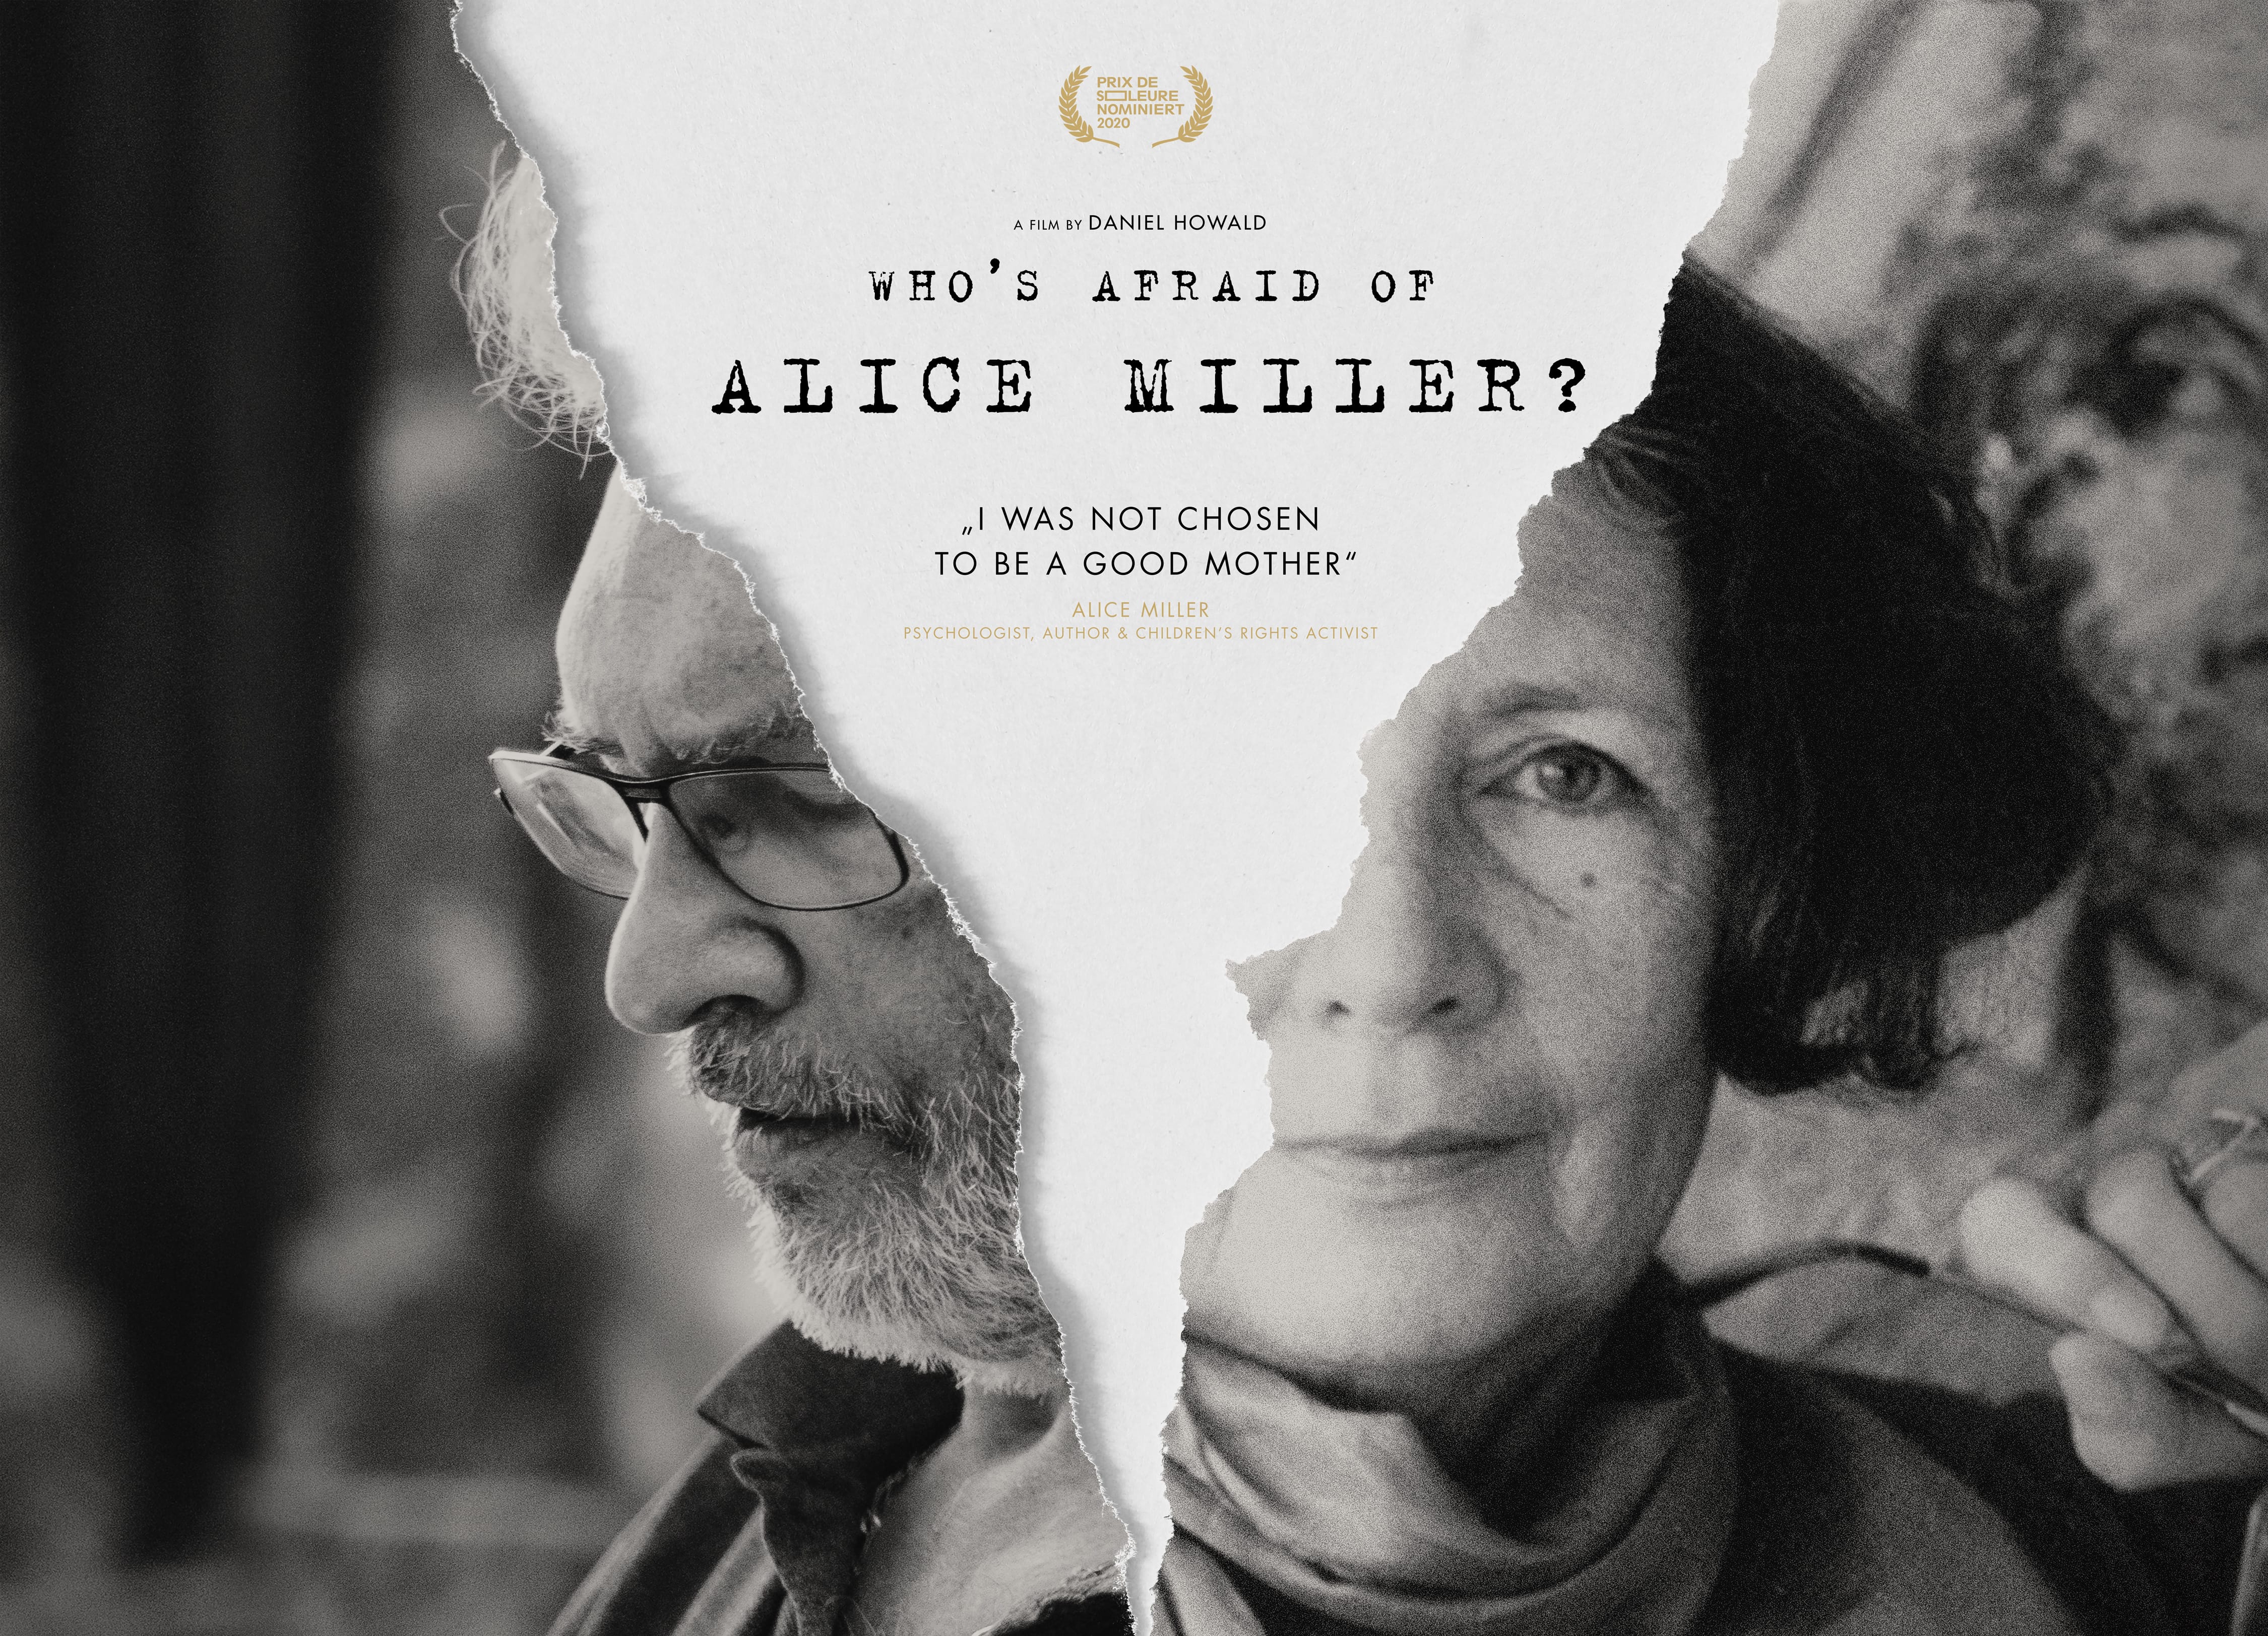 Who's afraid of Alice Miller? A Film by Daniel Howald.